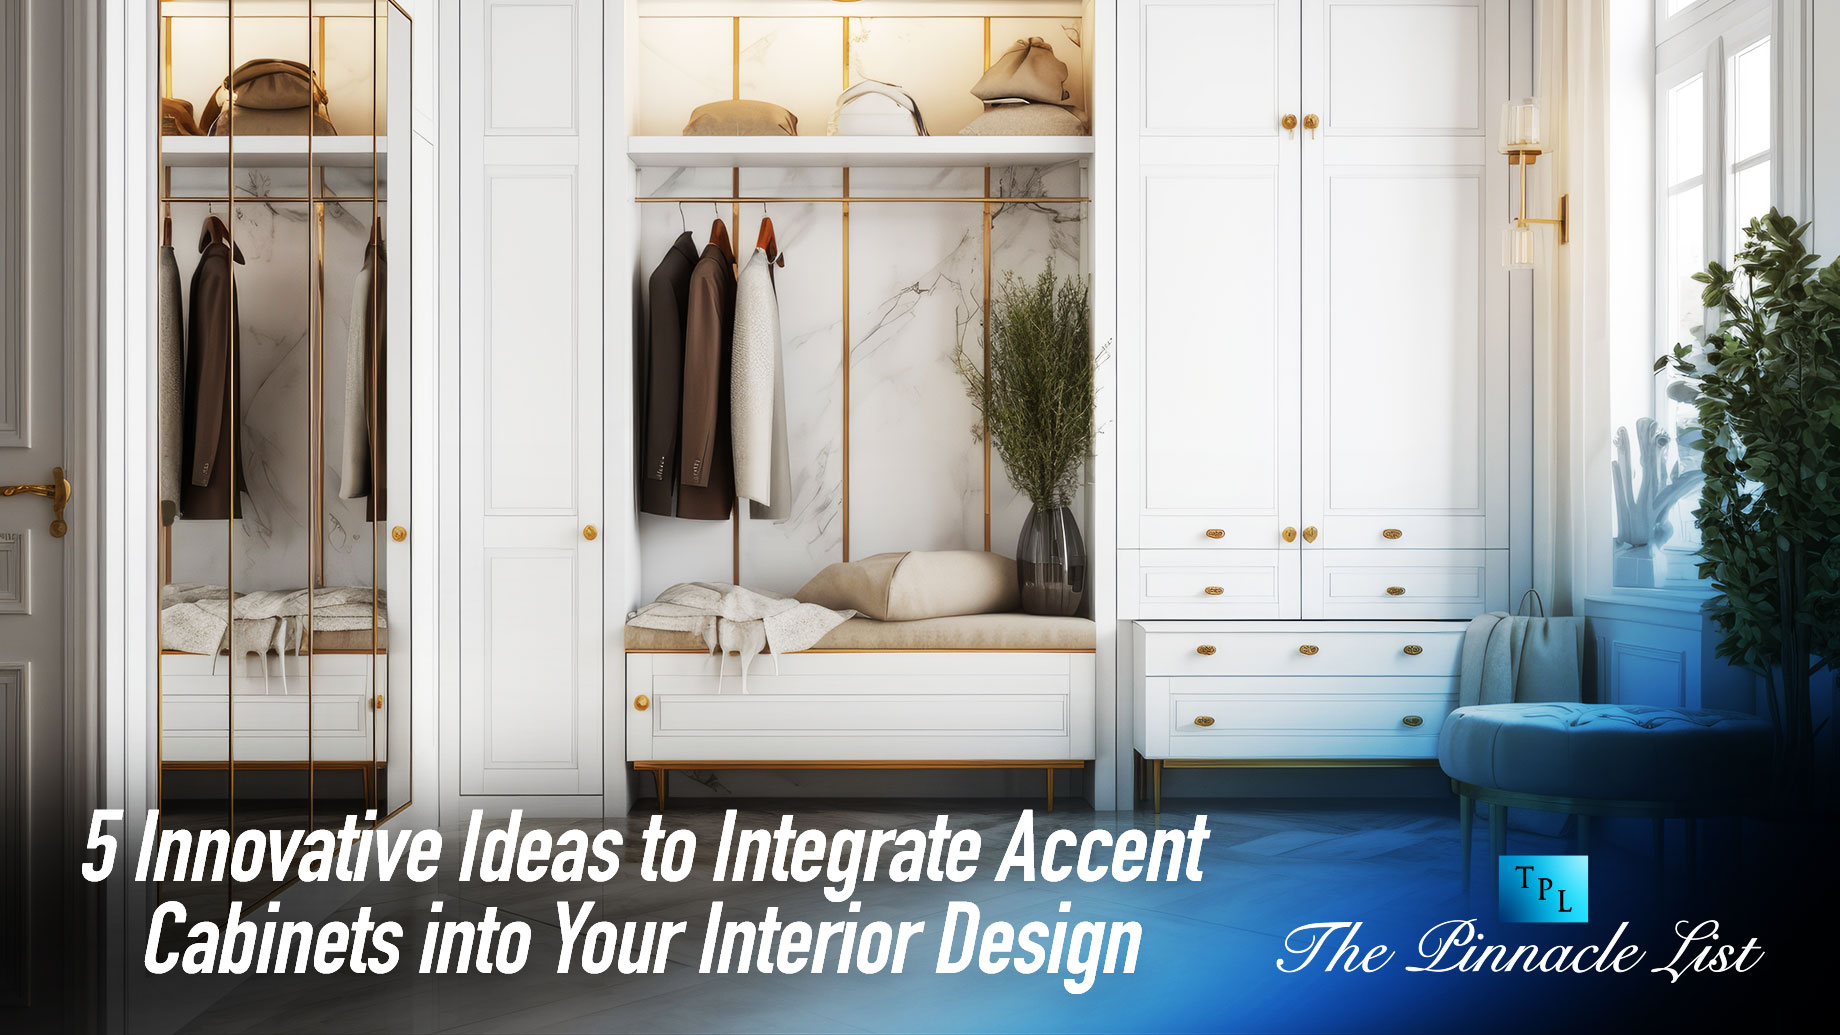 5 Innovative Ideas to Integrate Accent Cabinets into Your Interior Design